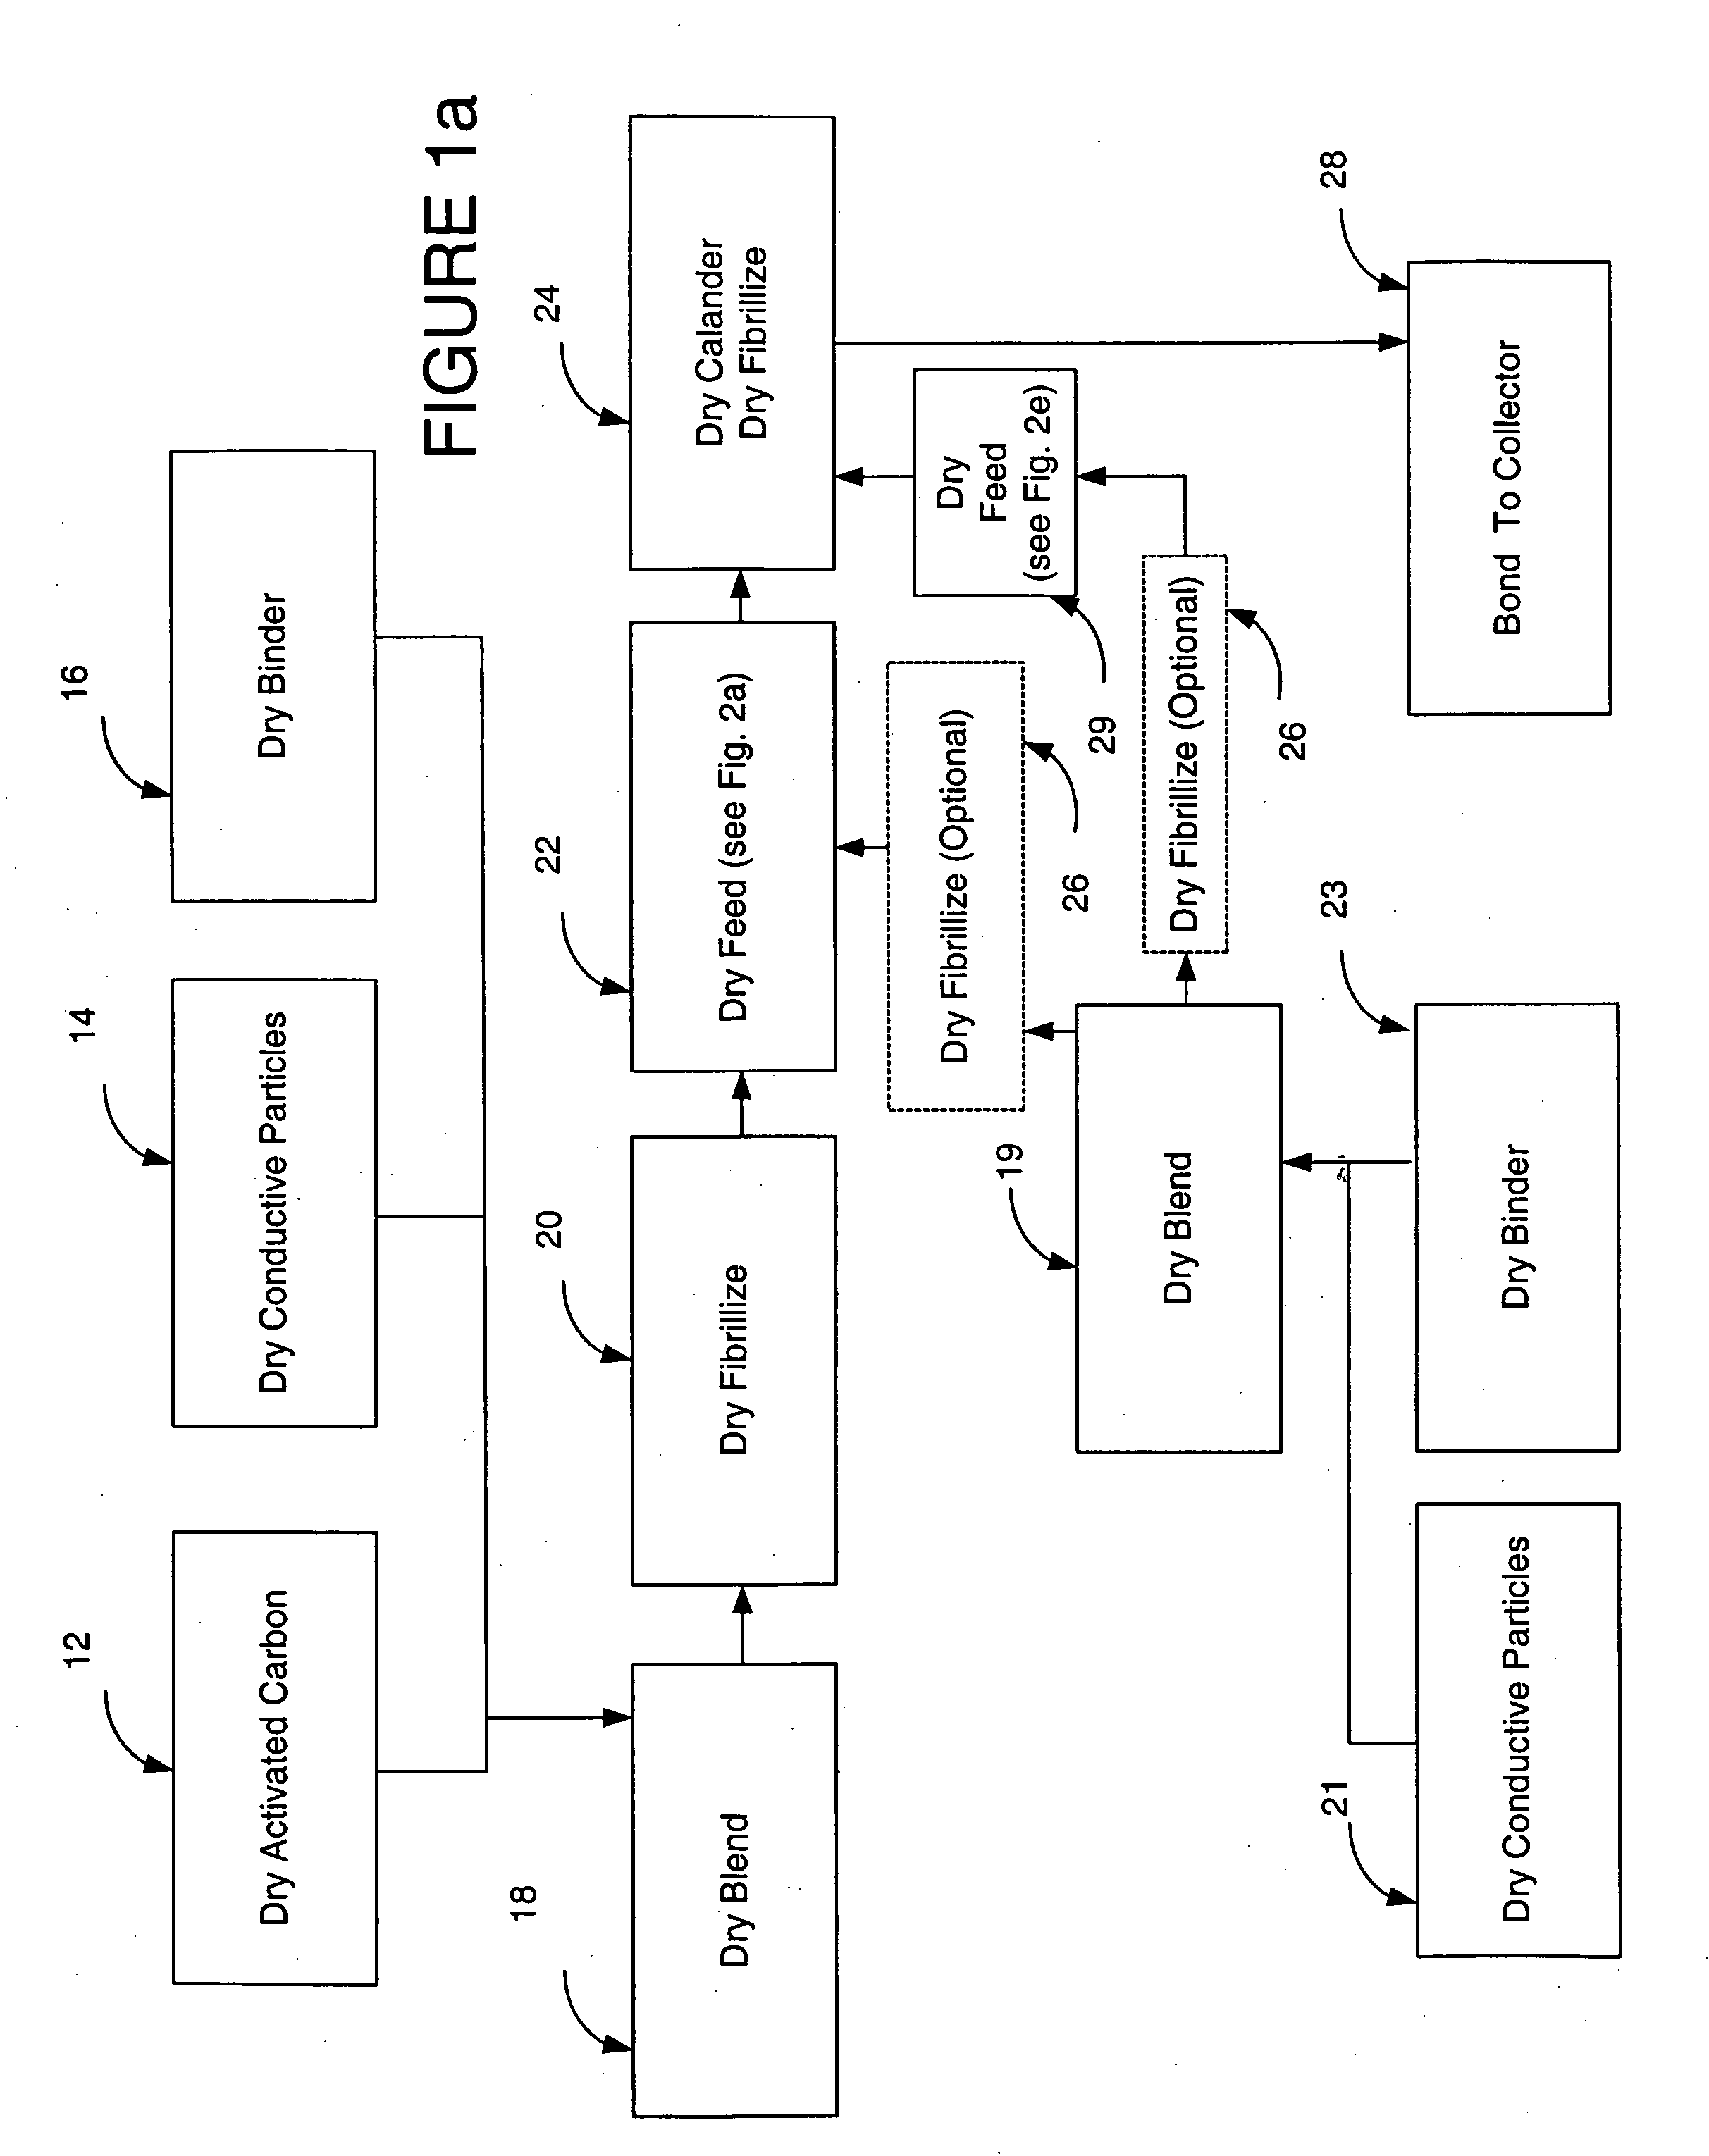 Recyclable dry particle based electrode and methods of making same